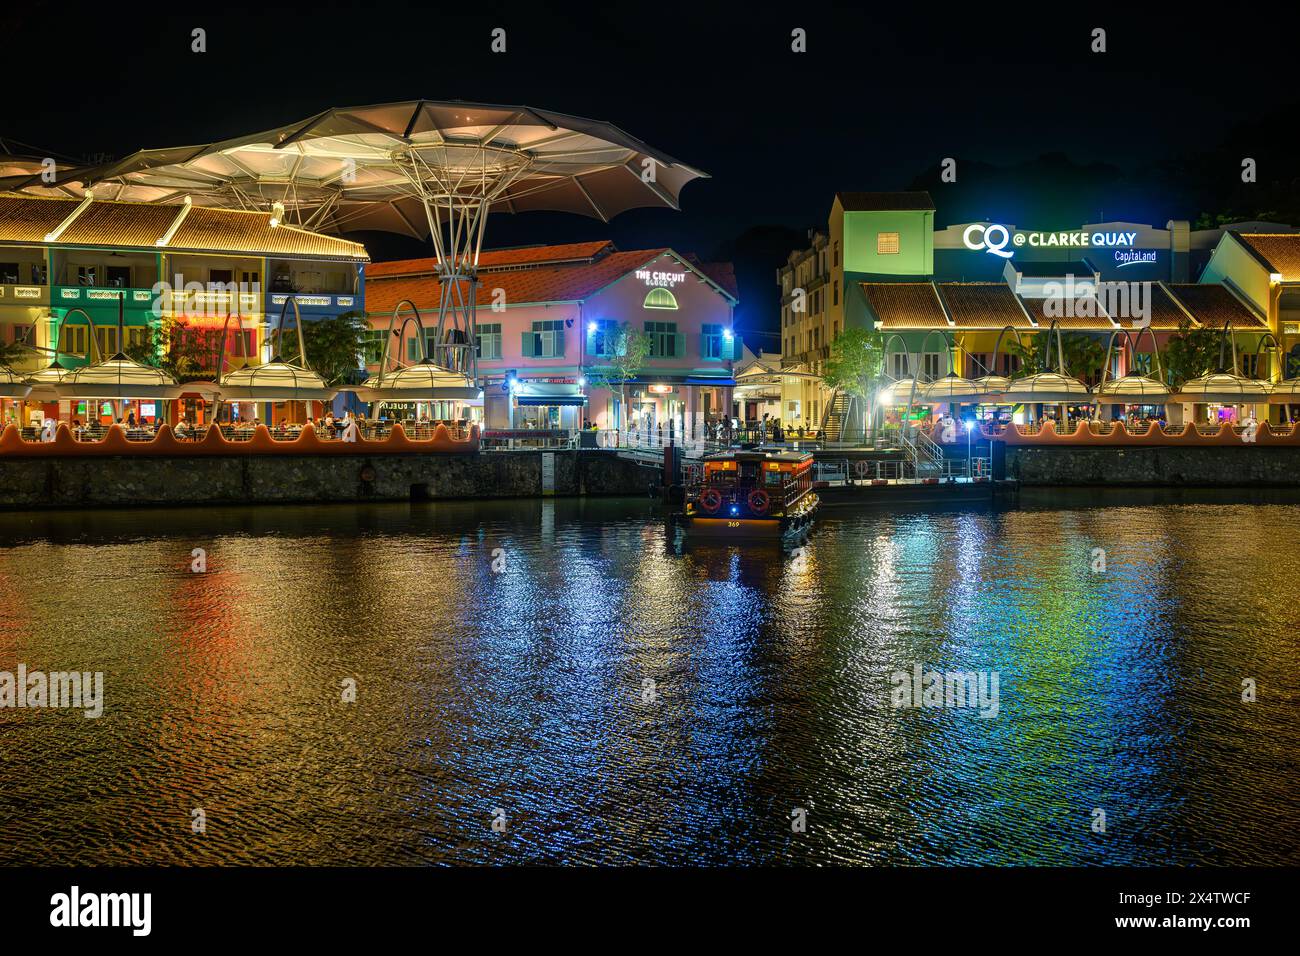 Clarke Quay, from the Singapore River at night Stock Photo